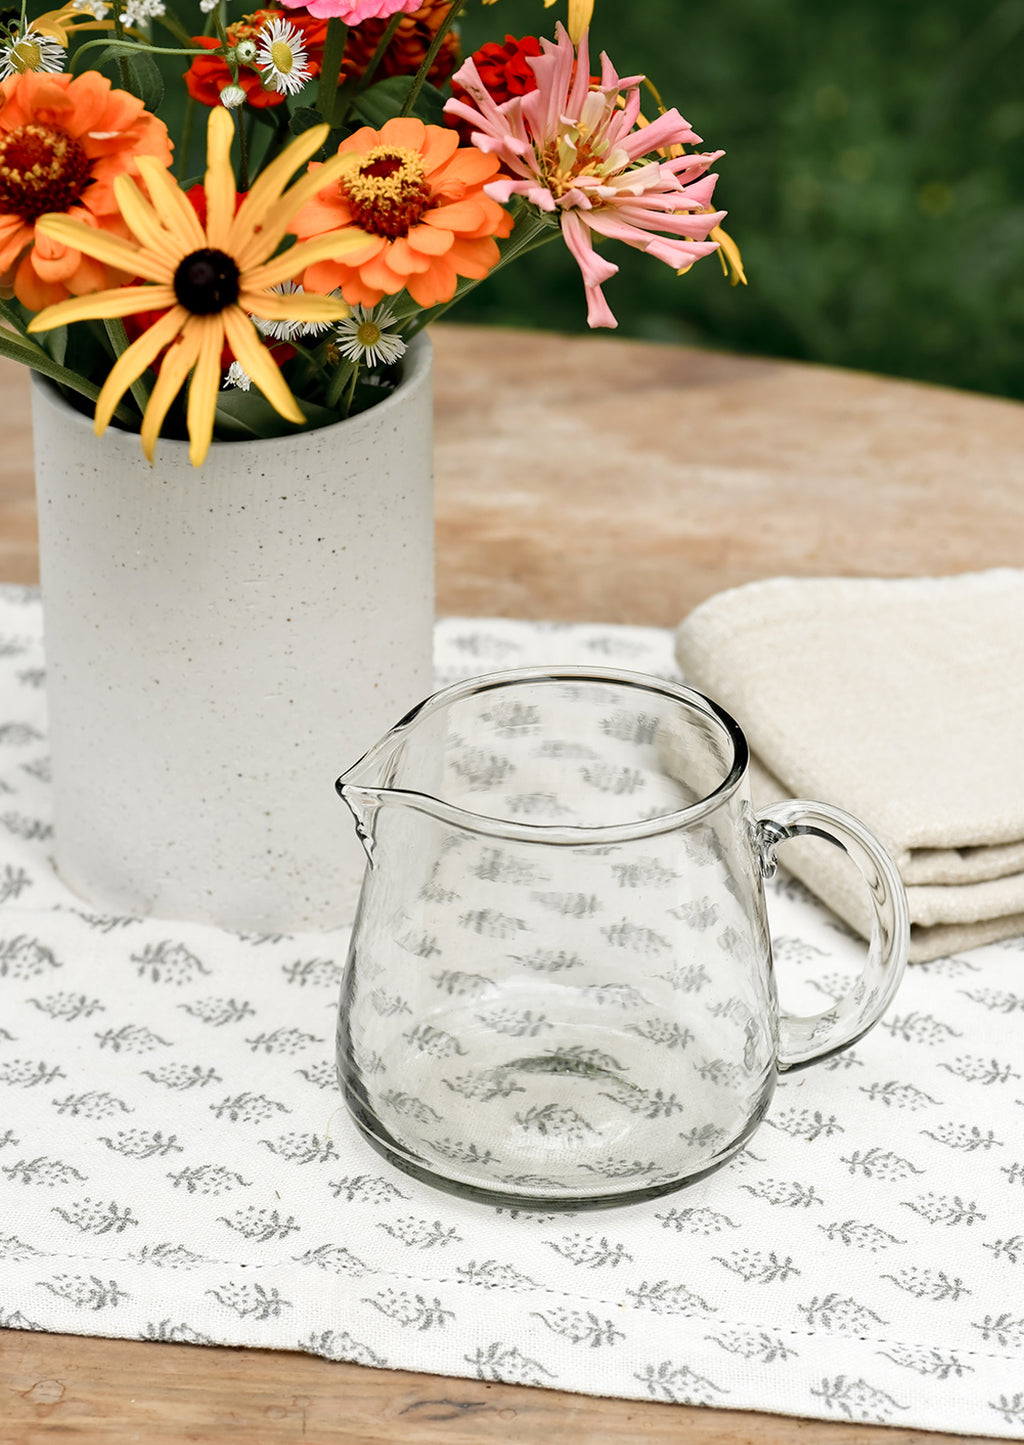 Large / 30 oz: A small clear glass pitcher on a table.